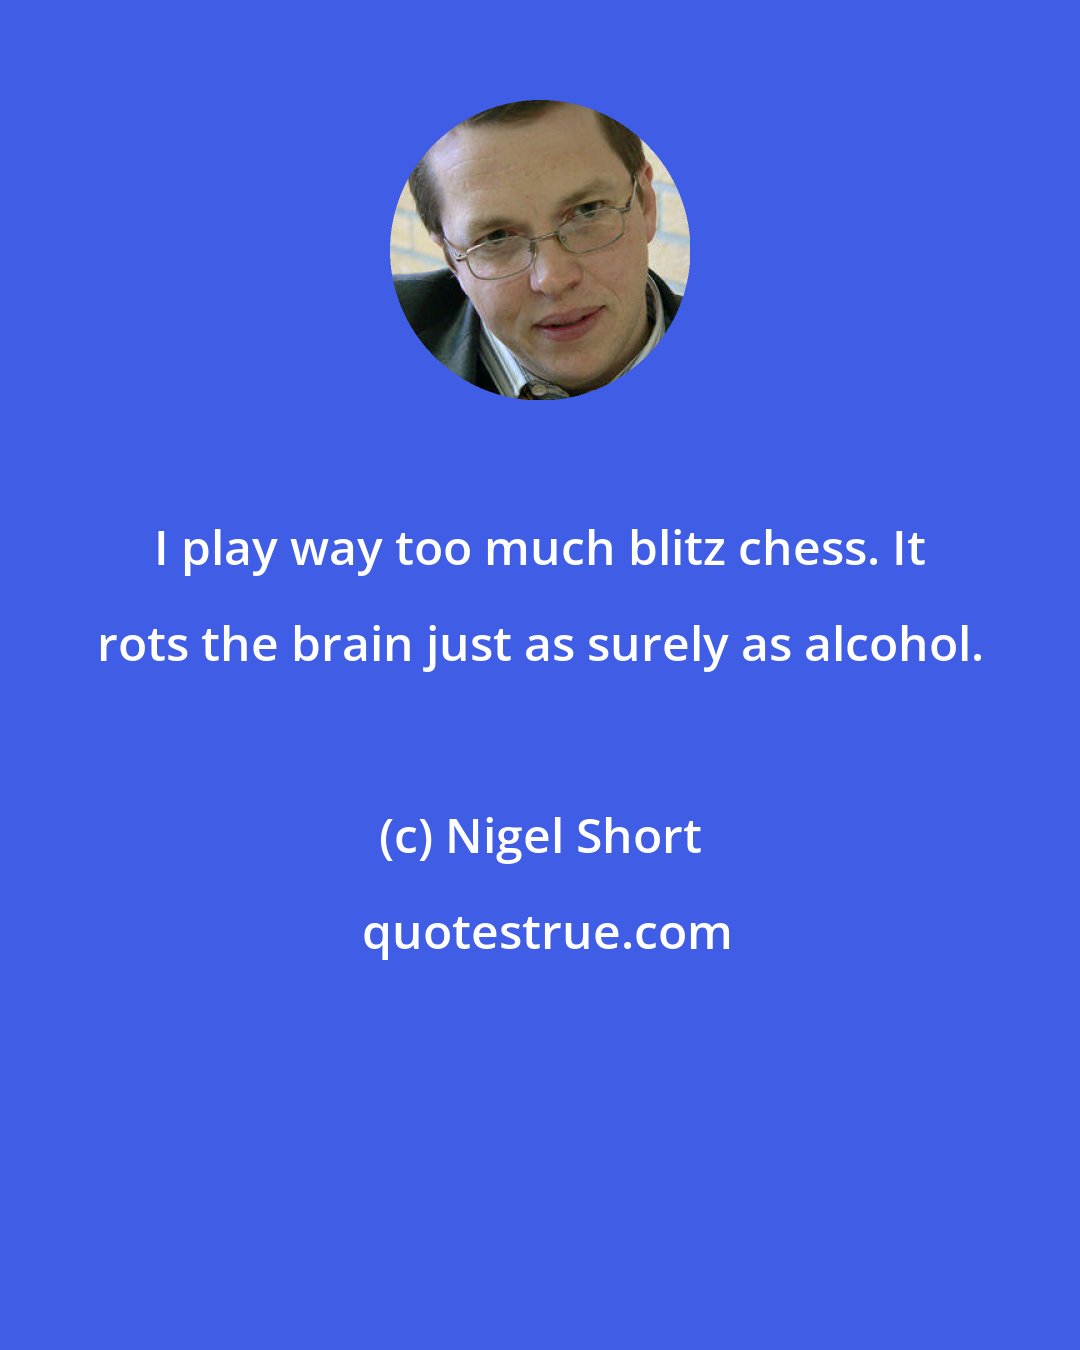 Nigel Short: I play way too much blitz chess. It rots the brain just as surely as alcohol.